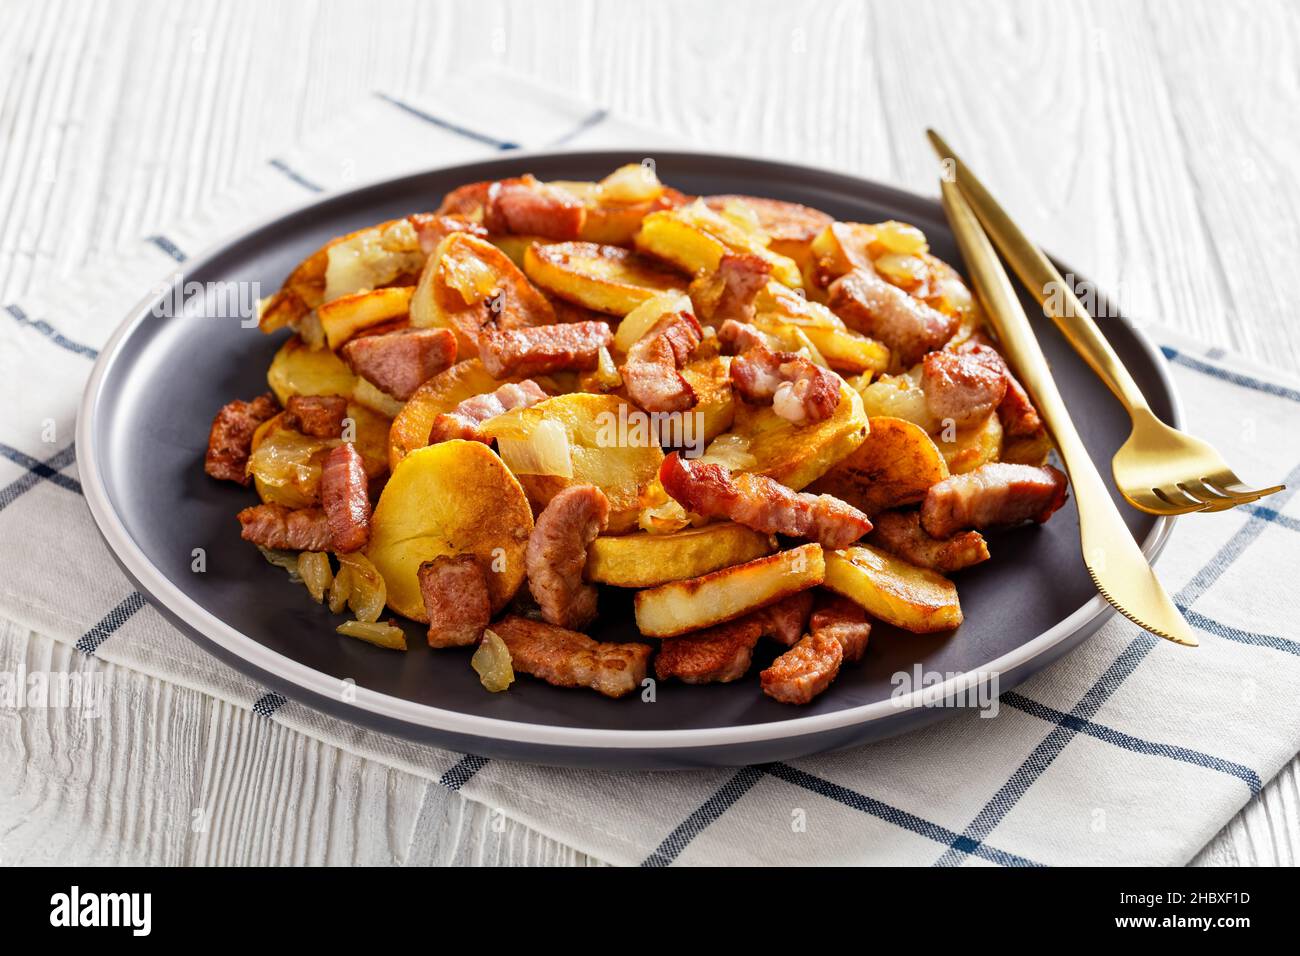 Bratkartoffeln, fried Potatoes with Bacon and onion on a plate with cutlery on a white wooden table, German cuisine Stock Photo